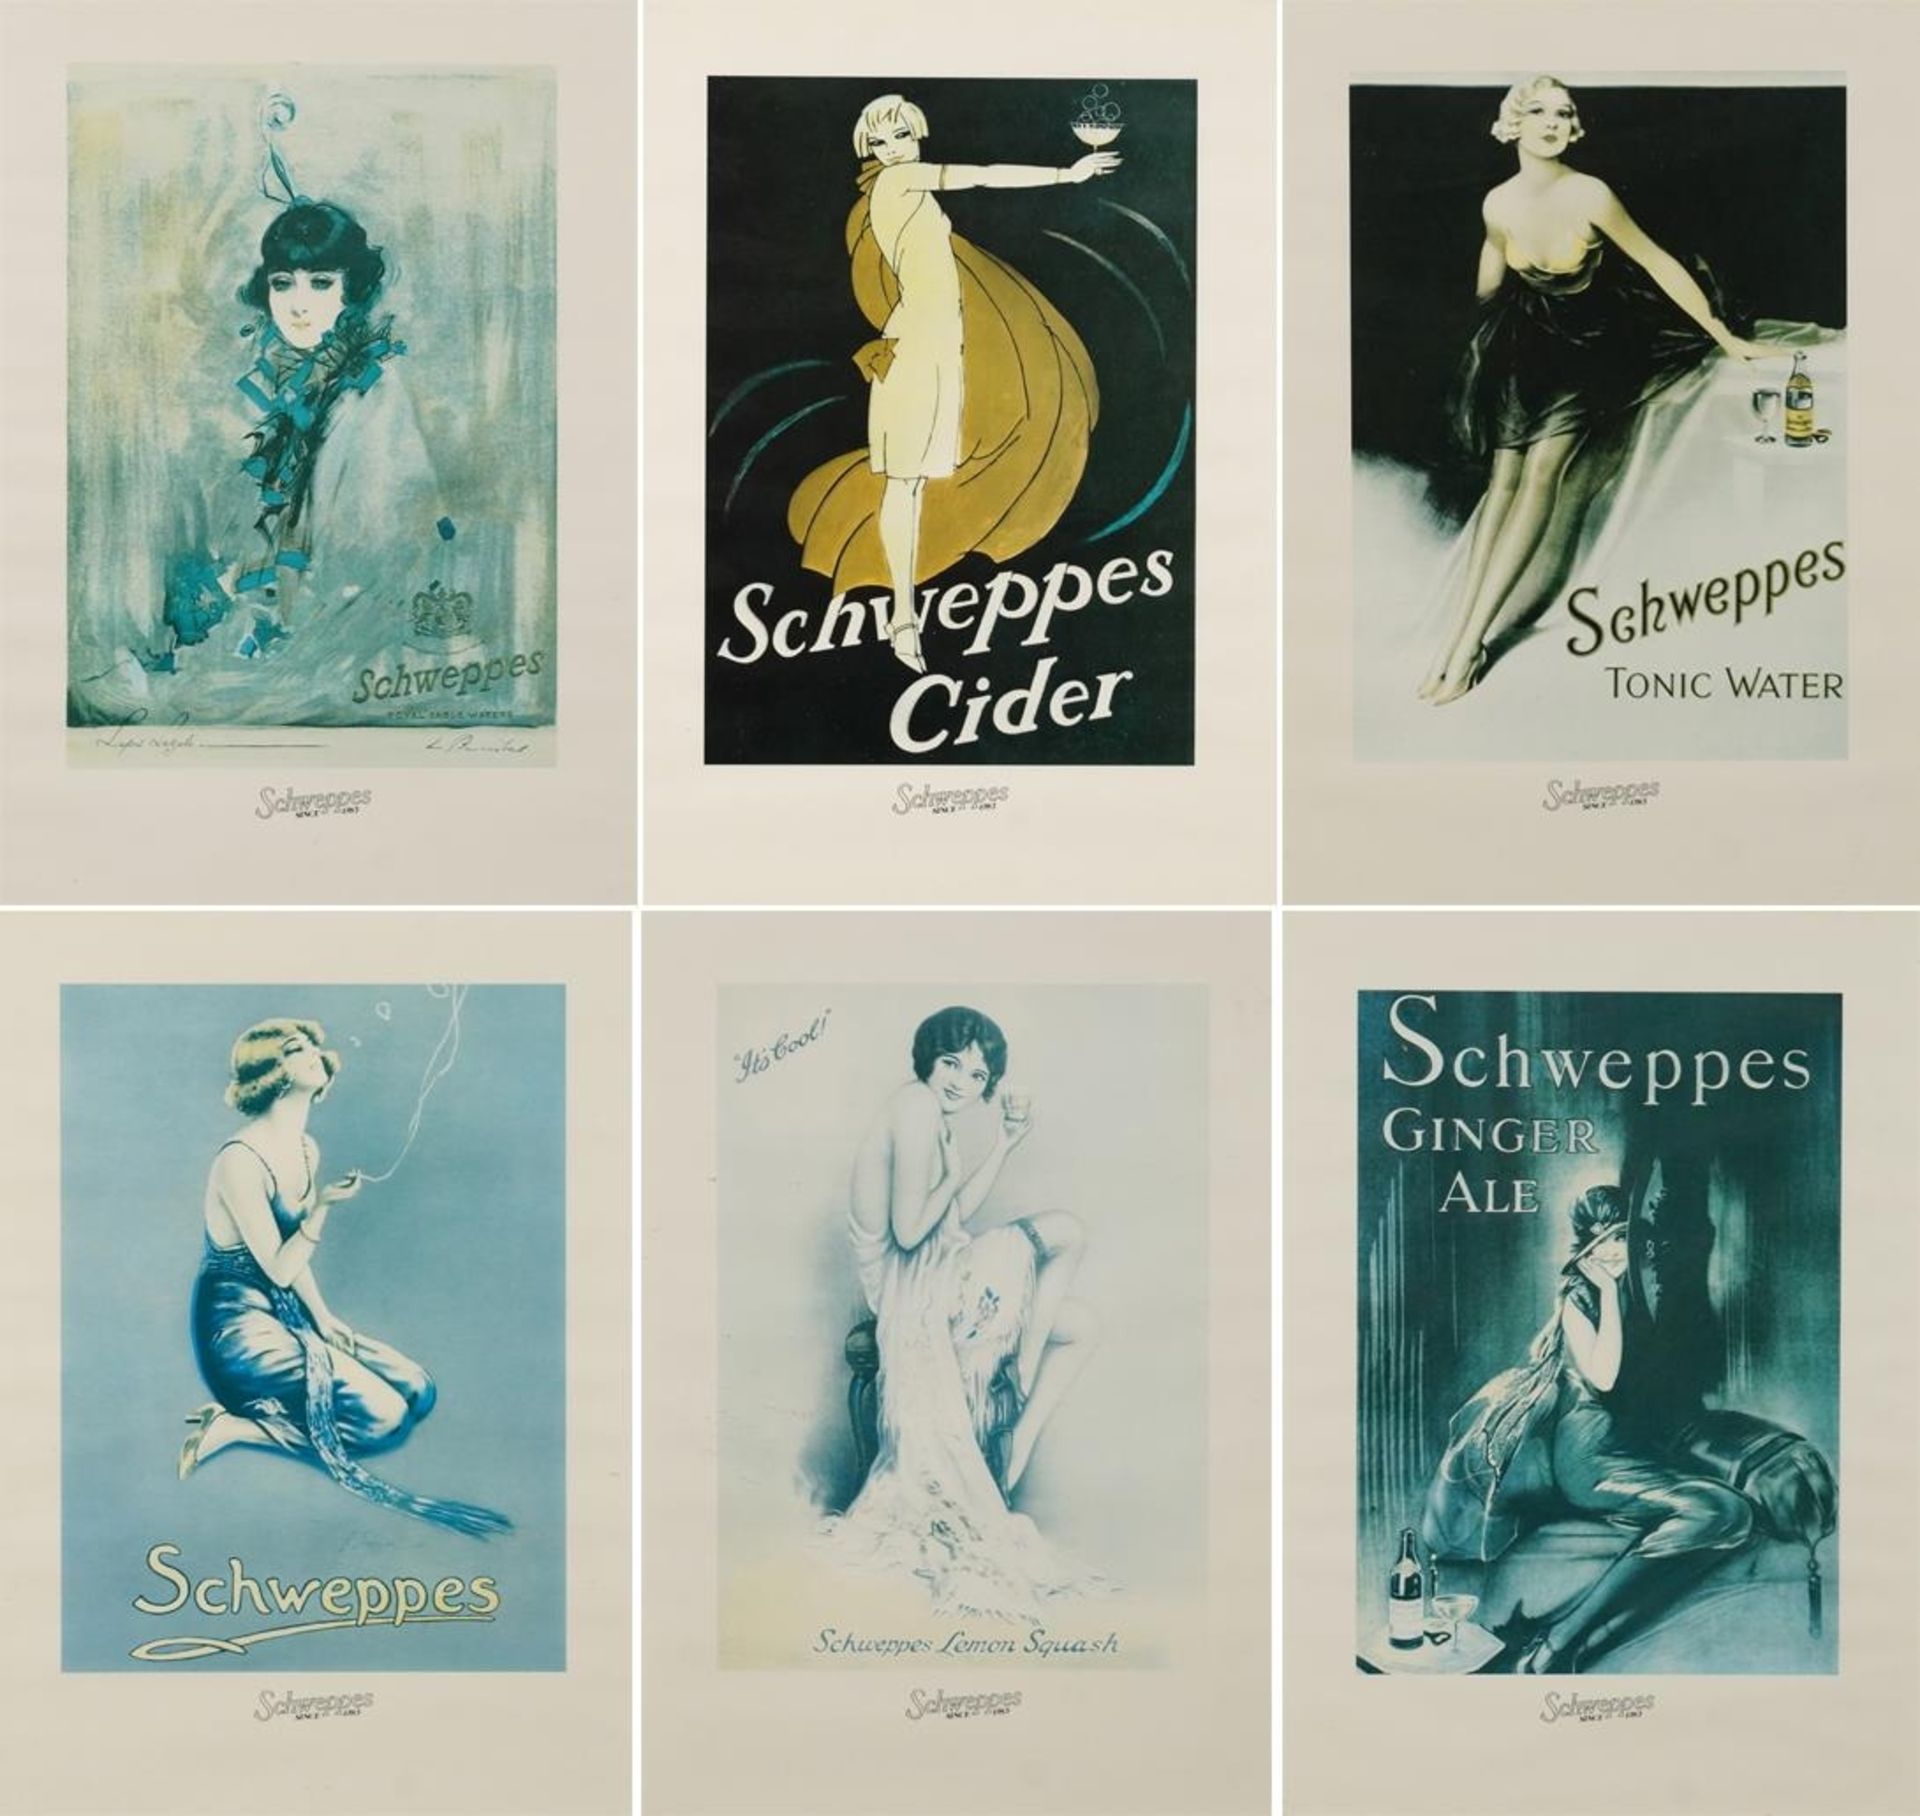 Schweppes, Cider, Tonic Water, Ginger Ale and Lemon Squash, set of six posters, framed and glazed,